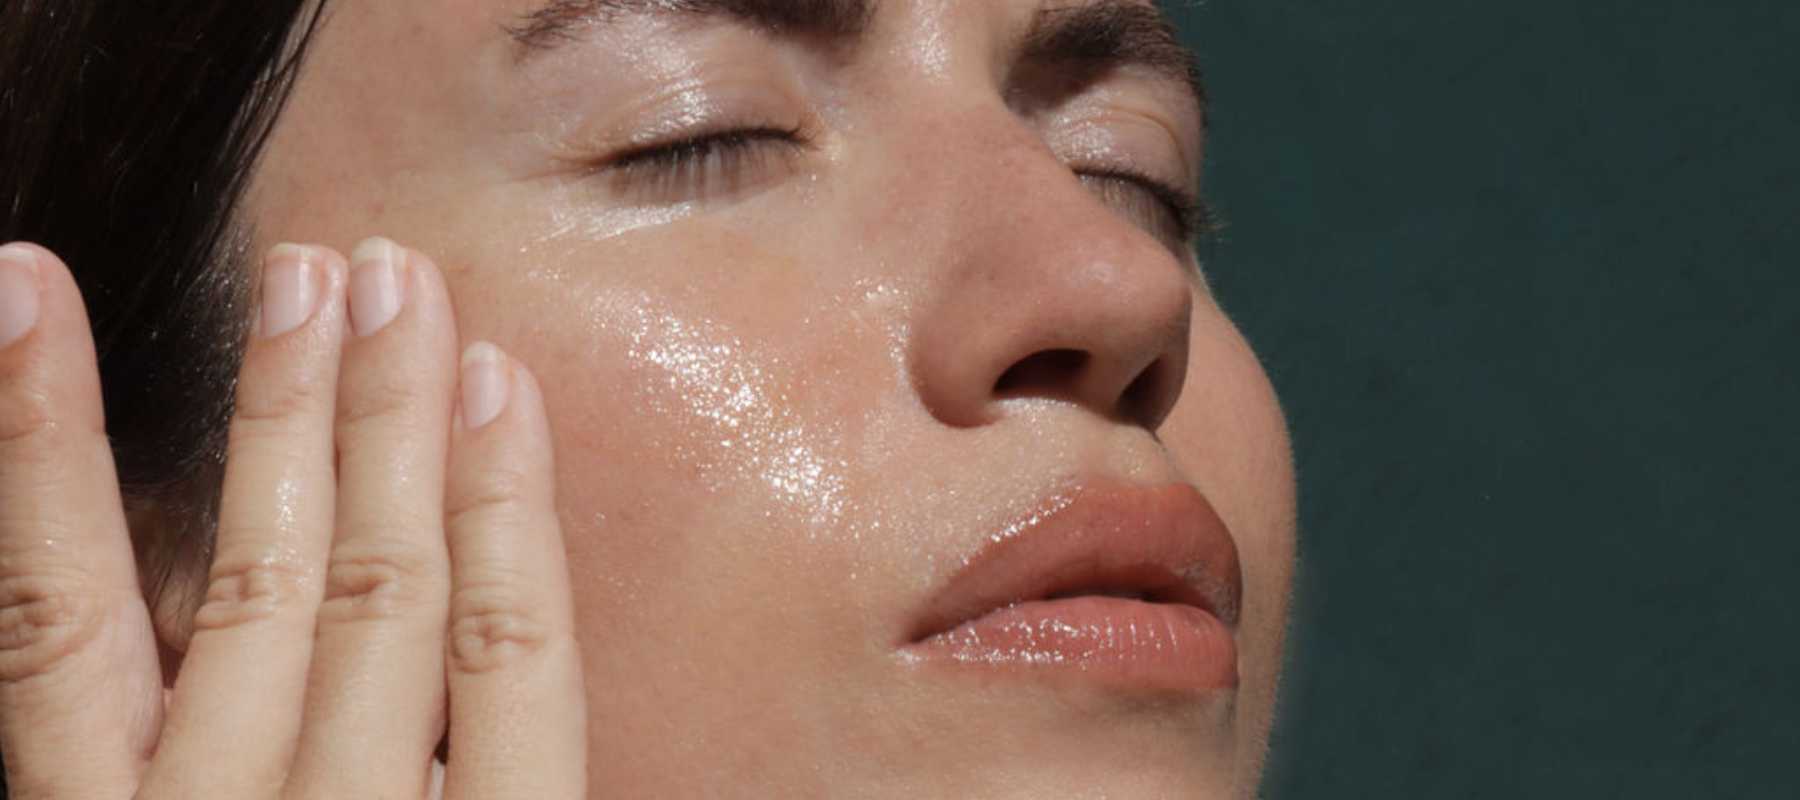 Sensitive skin? Read on to find out what the natural, gentle alternatives are to retinol.